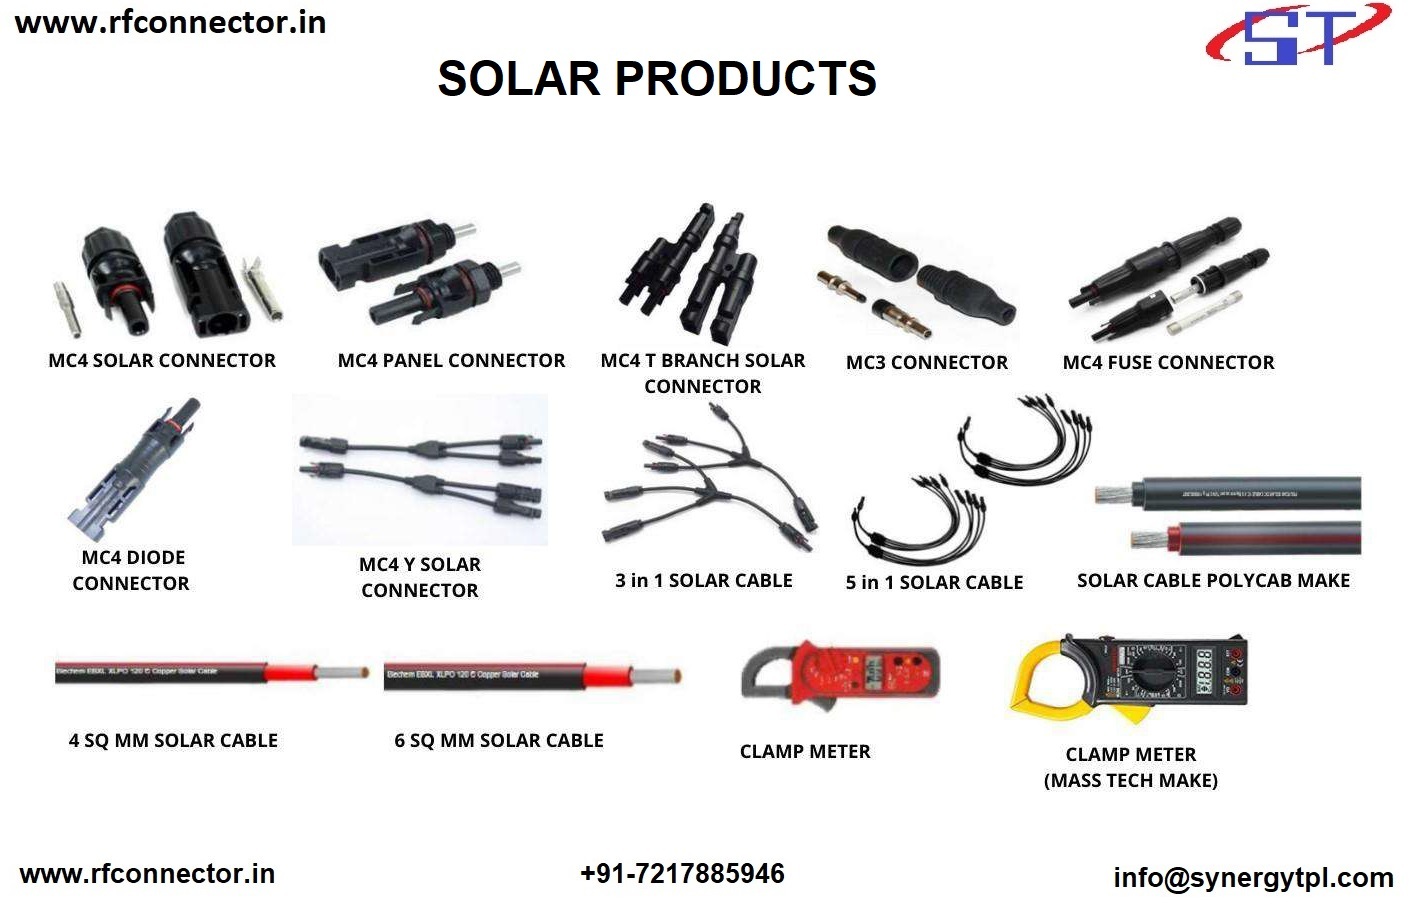 5 IN 1 SOLAR CABLE